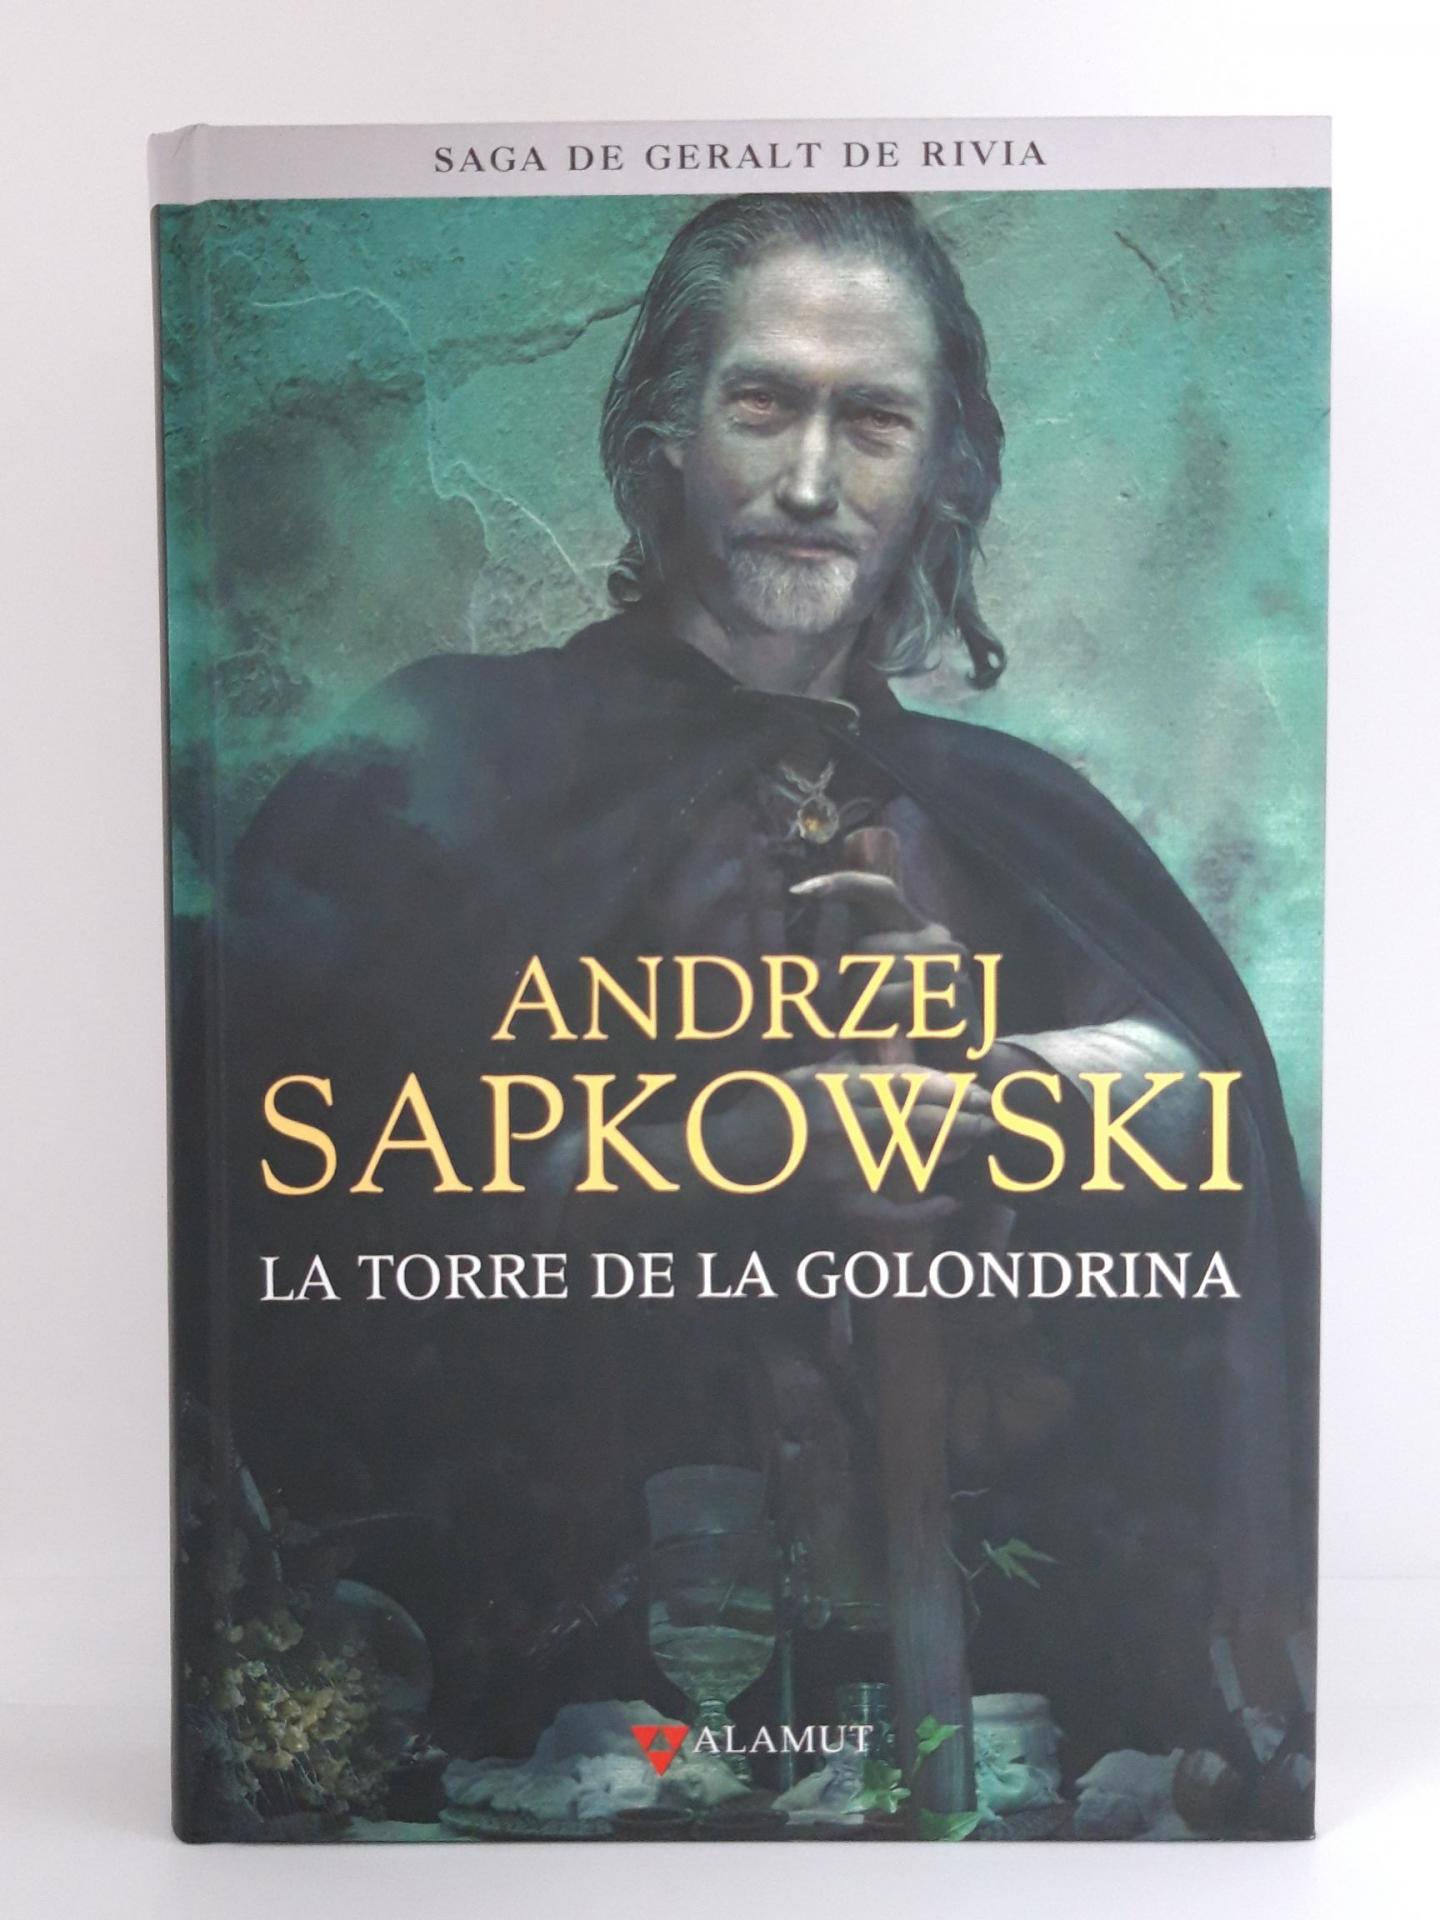 Coleccion The Witcher Libros